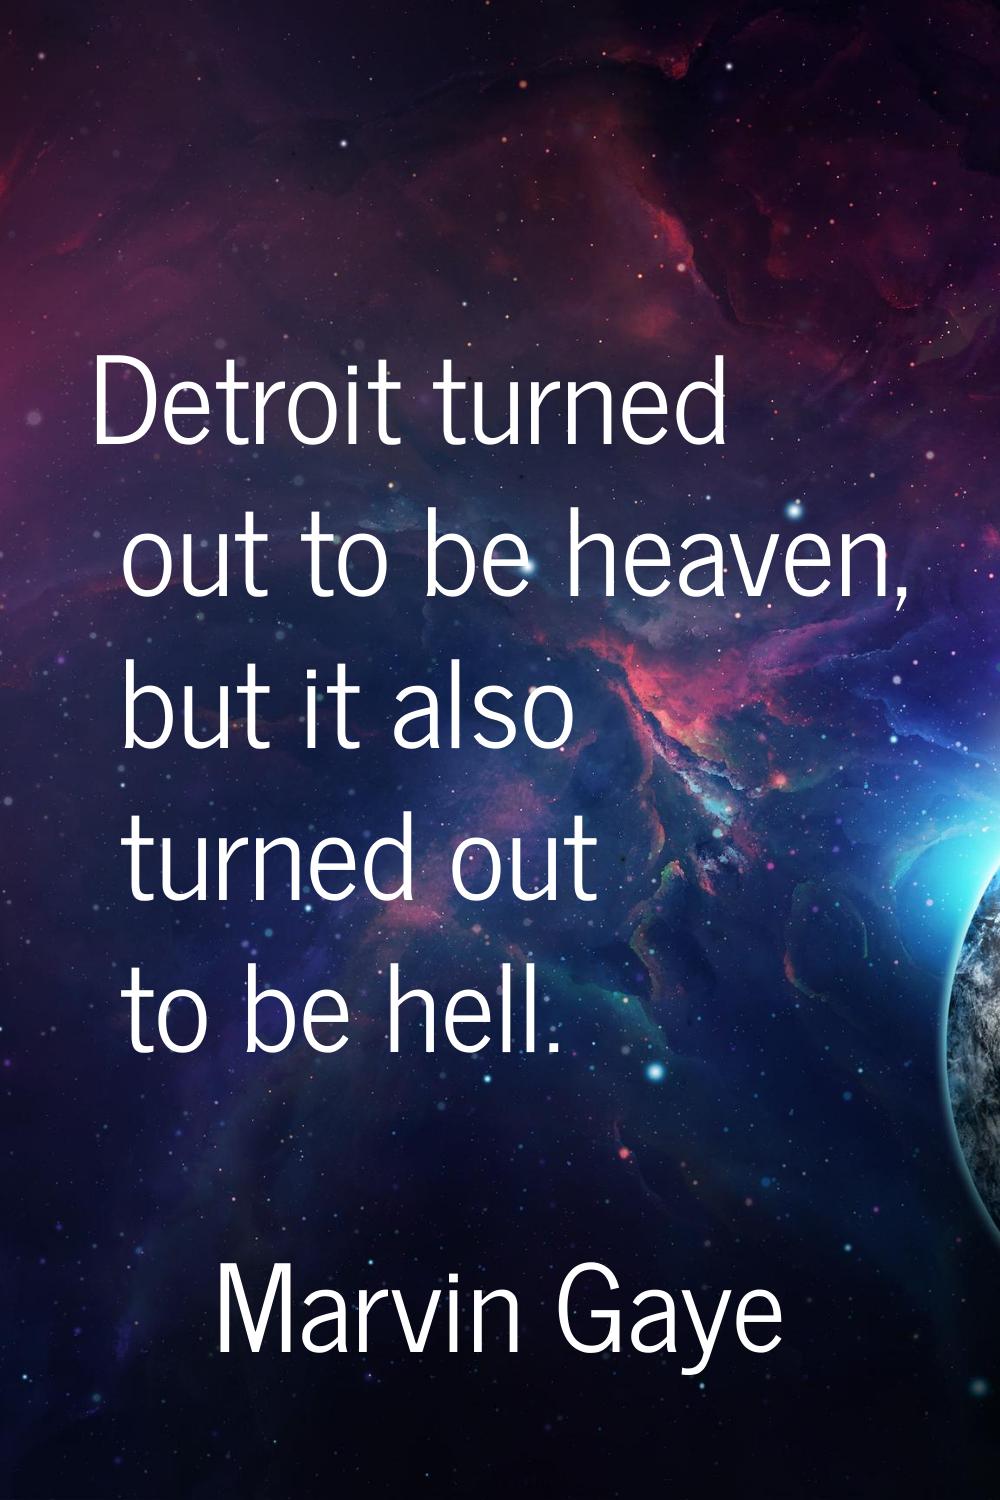 Detroit turned out to be heaven, but it also turned out to be hell.